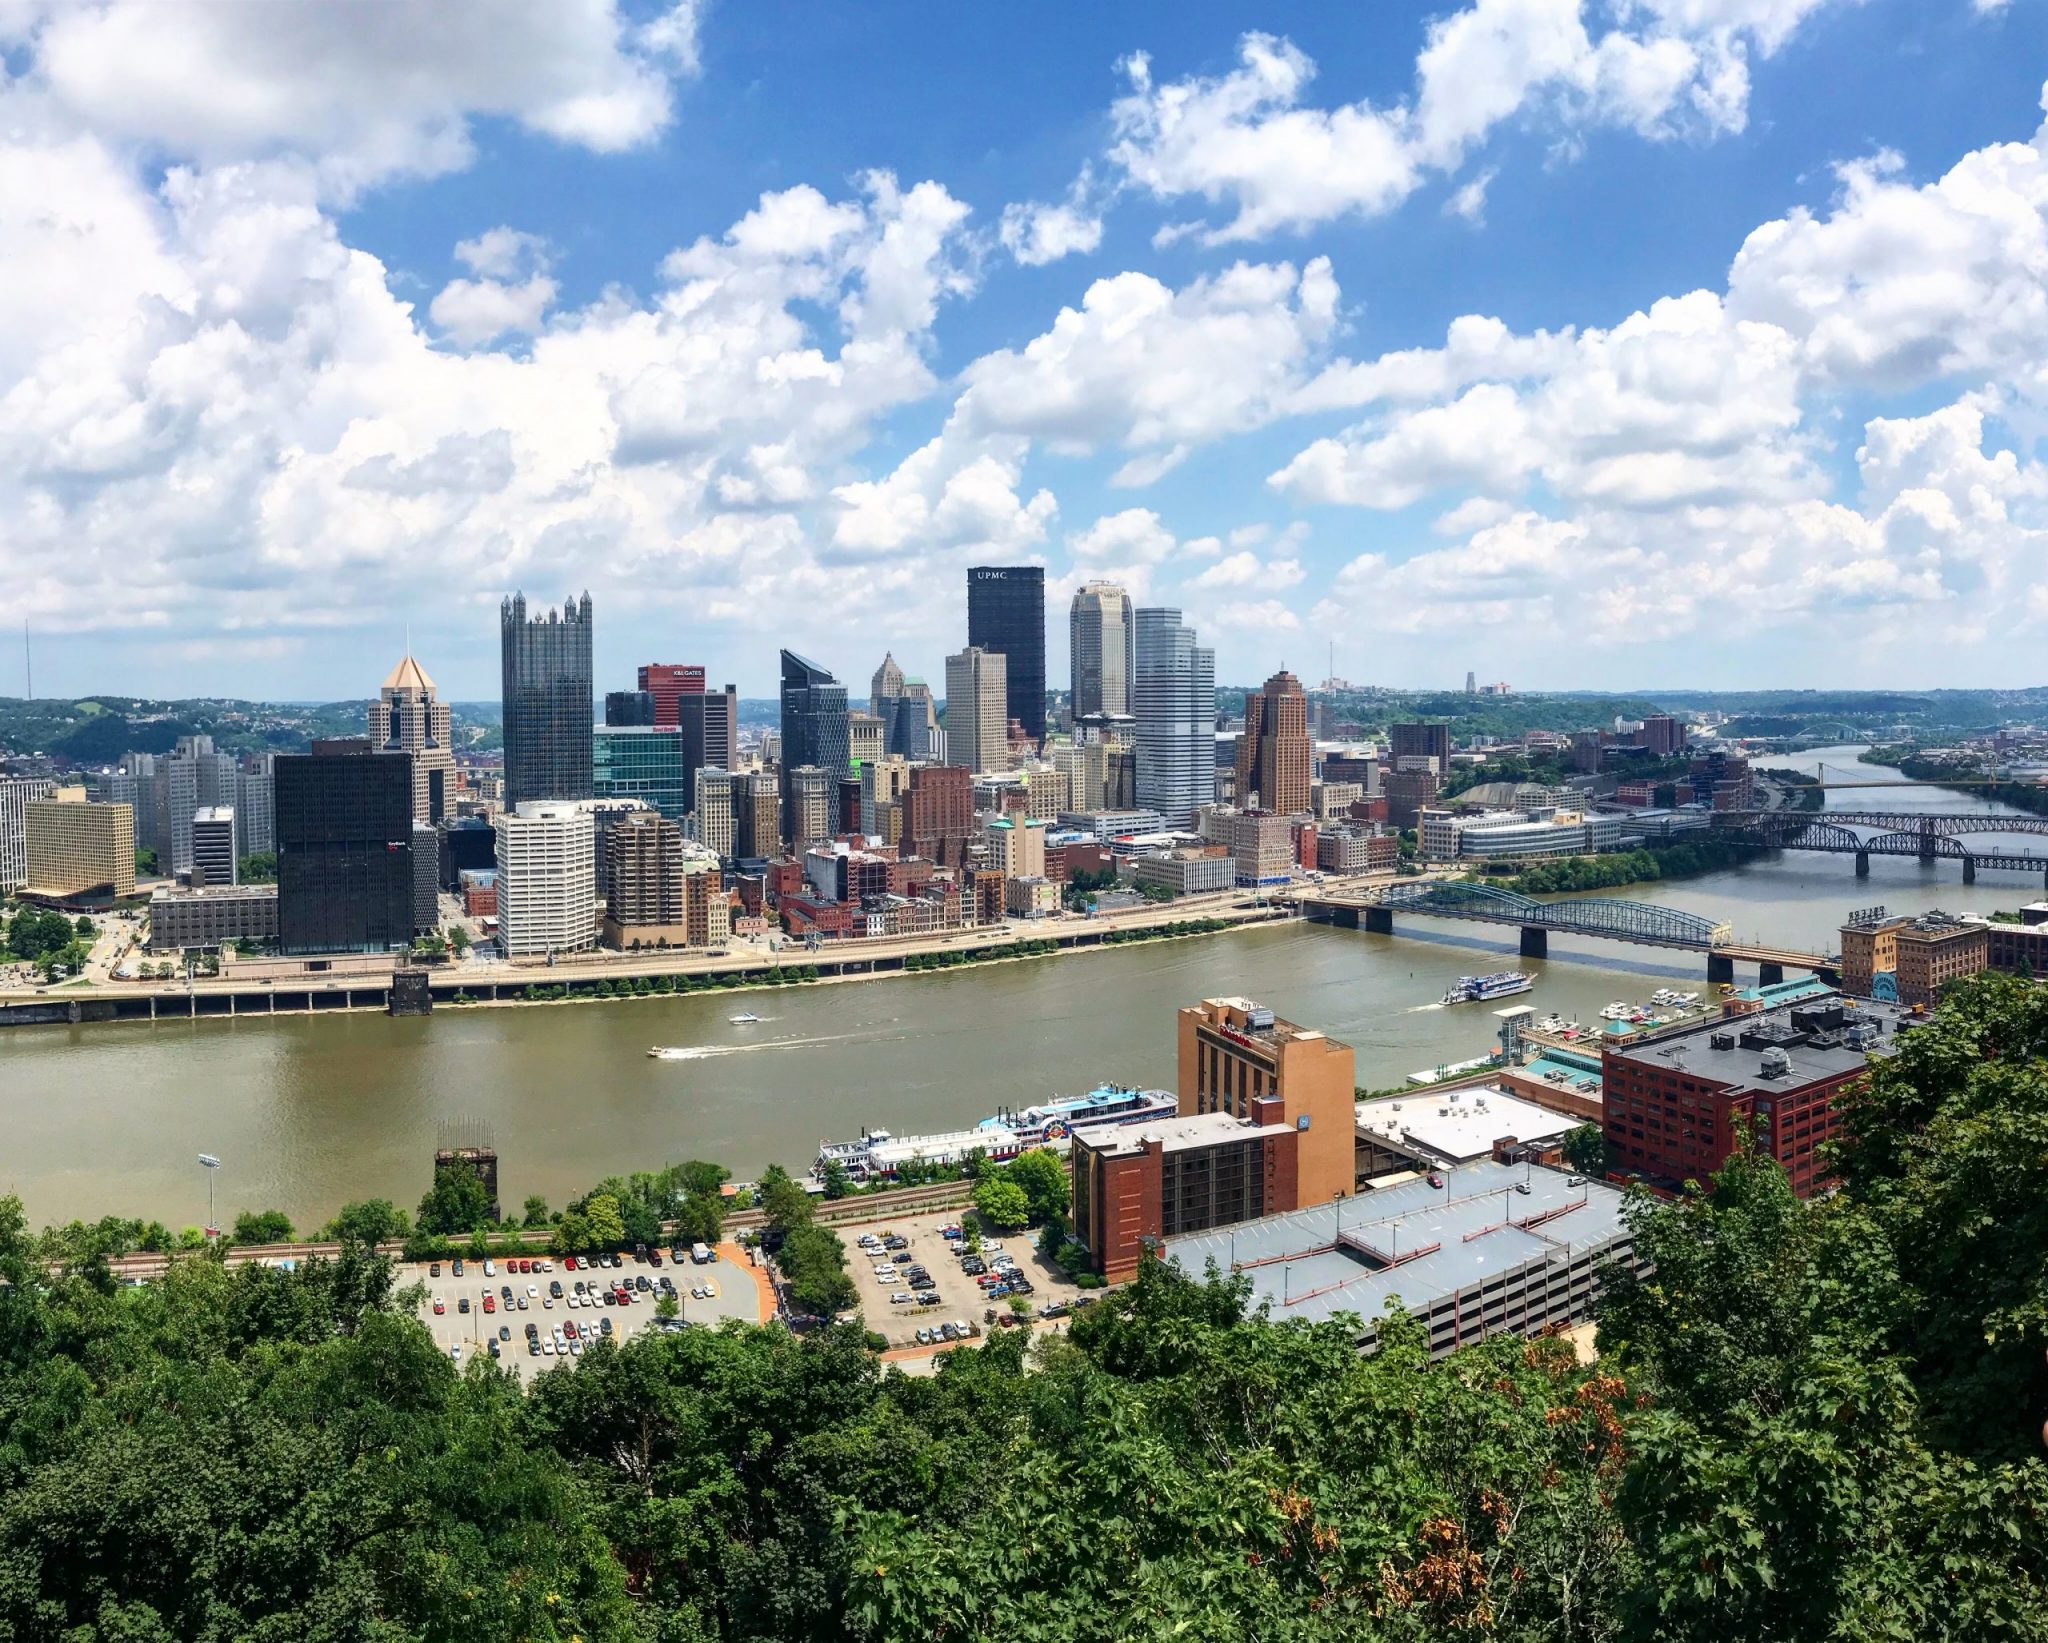 Make sure to catch a glimpse of the skyline when exploring things to do in Pittsburgh.